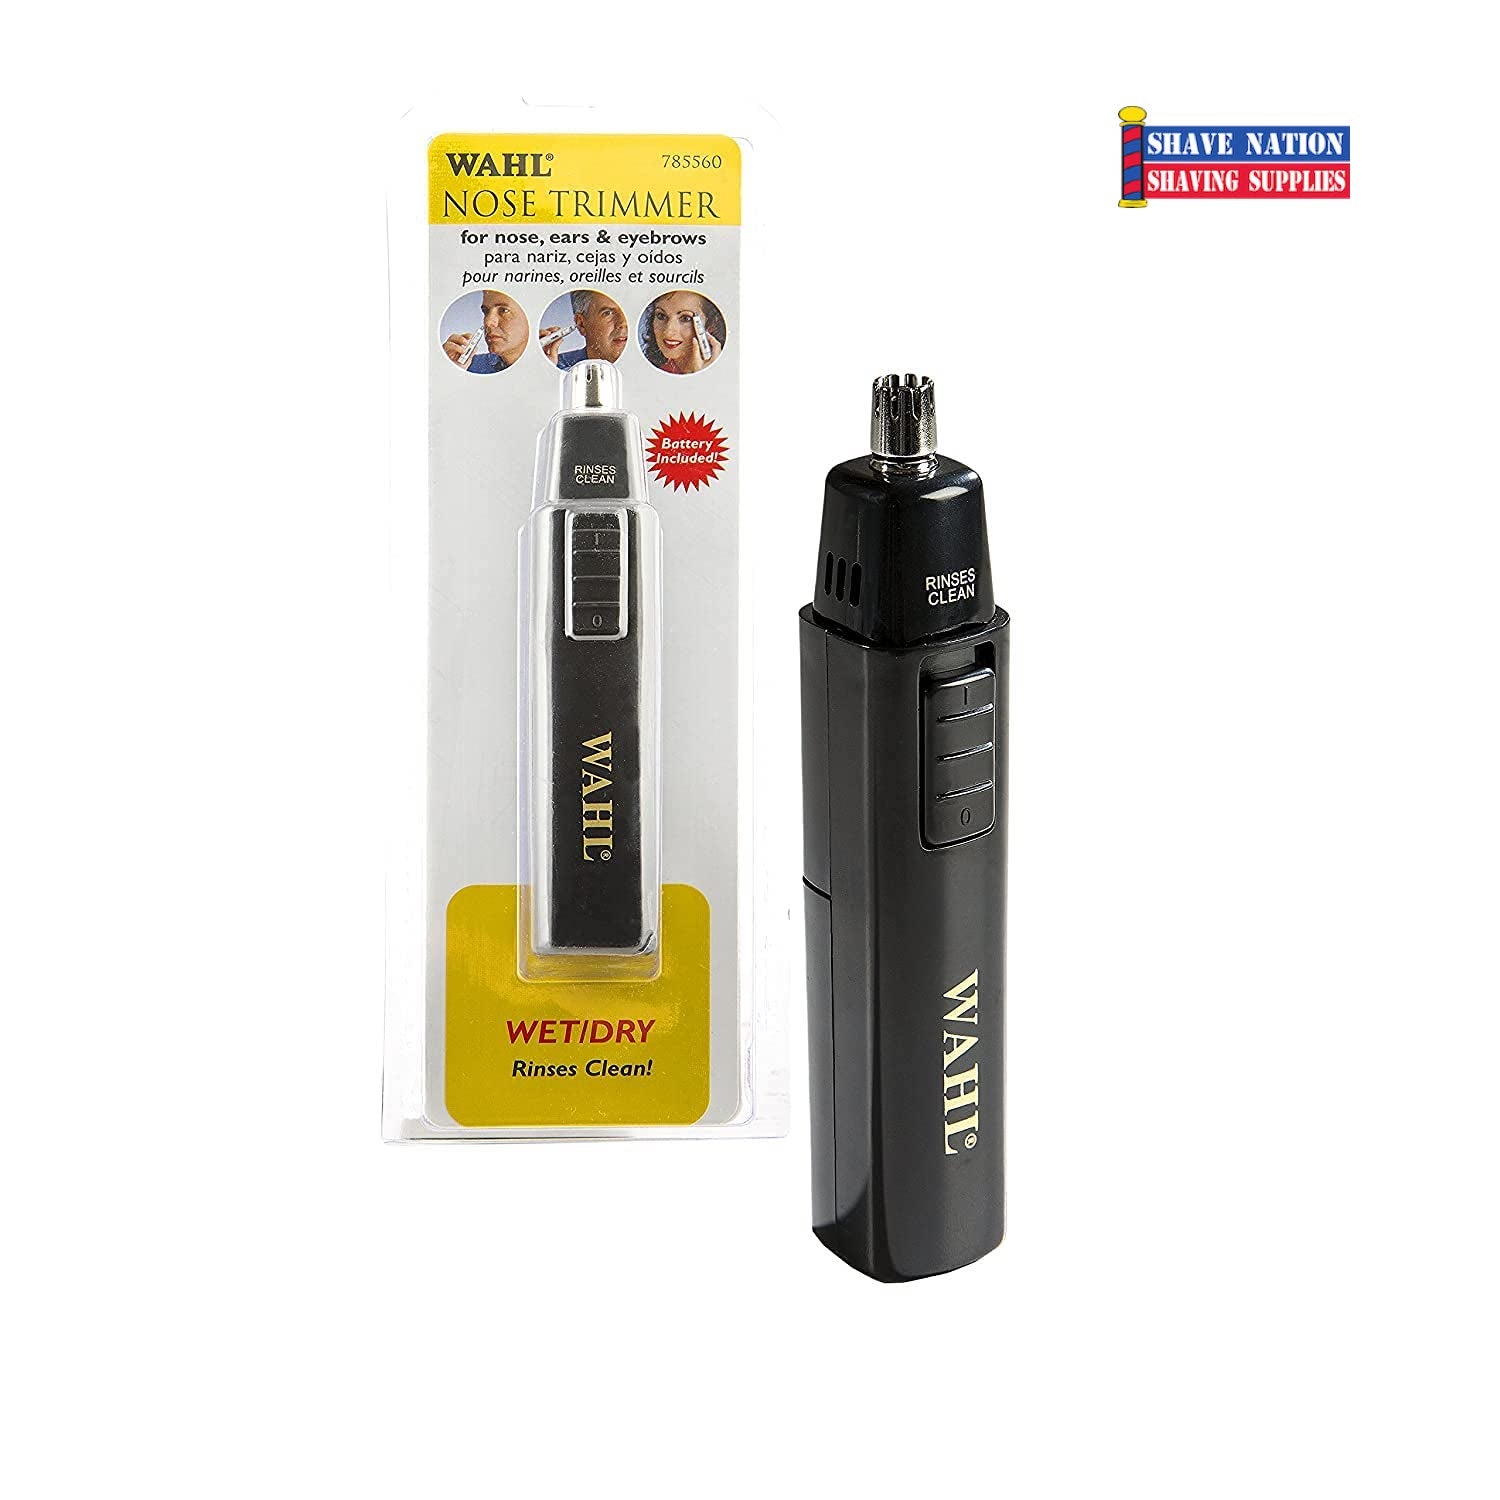 Wahl Professional Nose, Ear, Eyebrow Trimmer